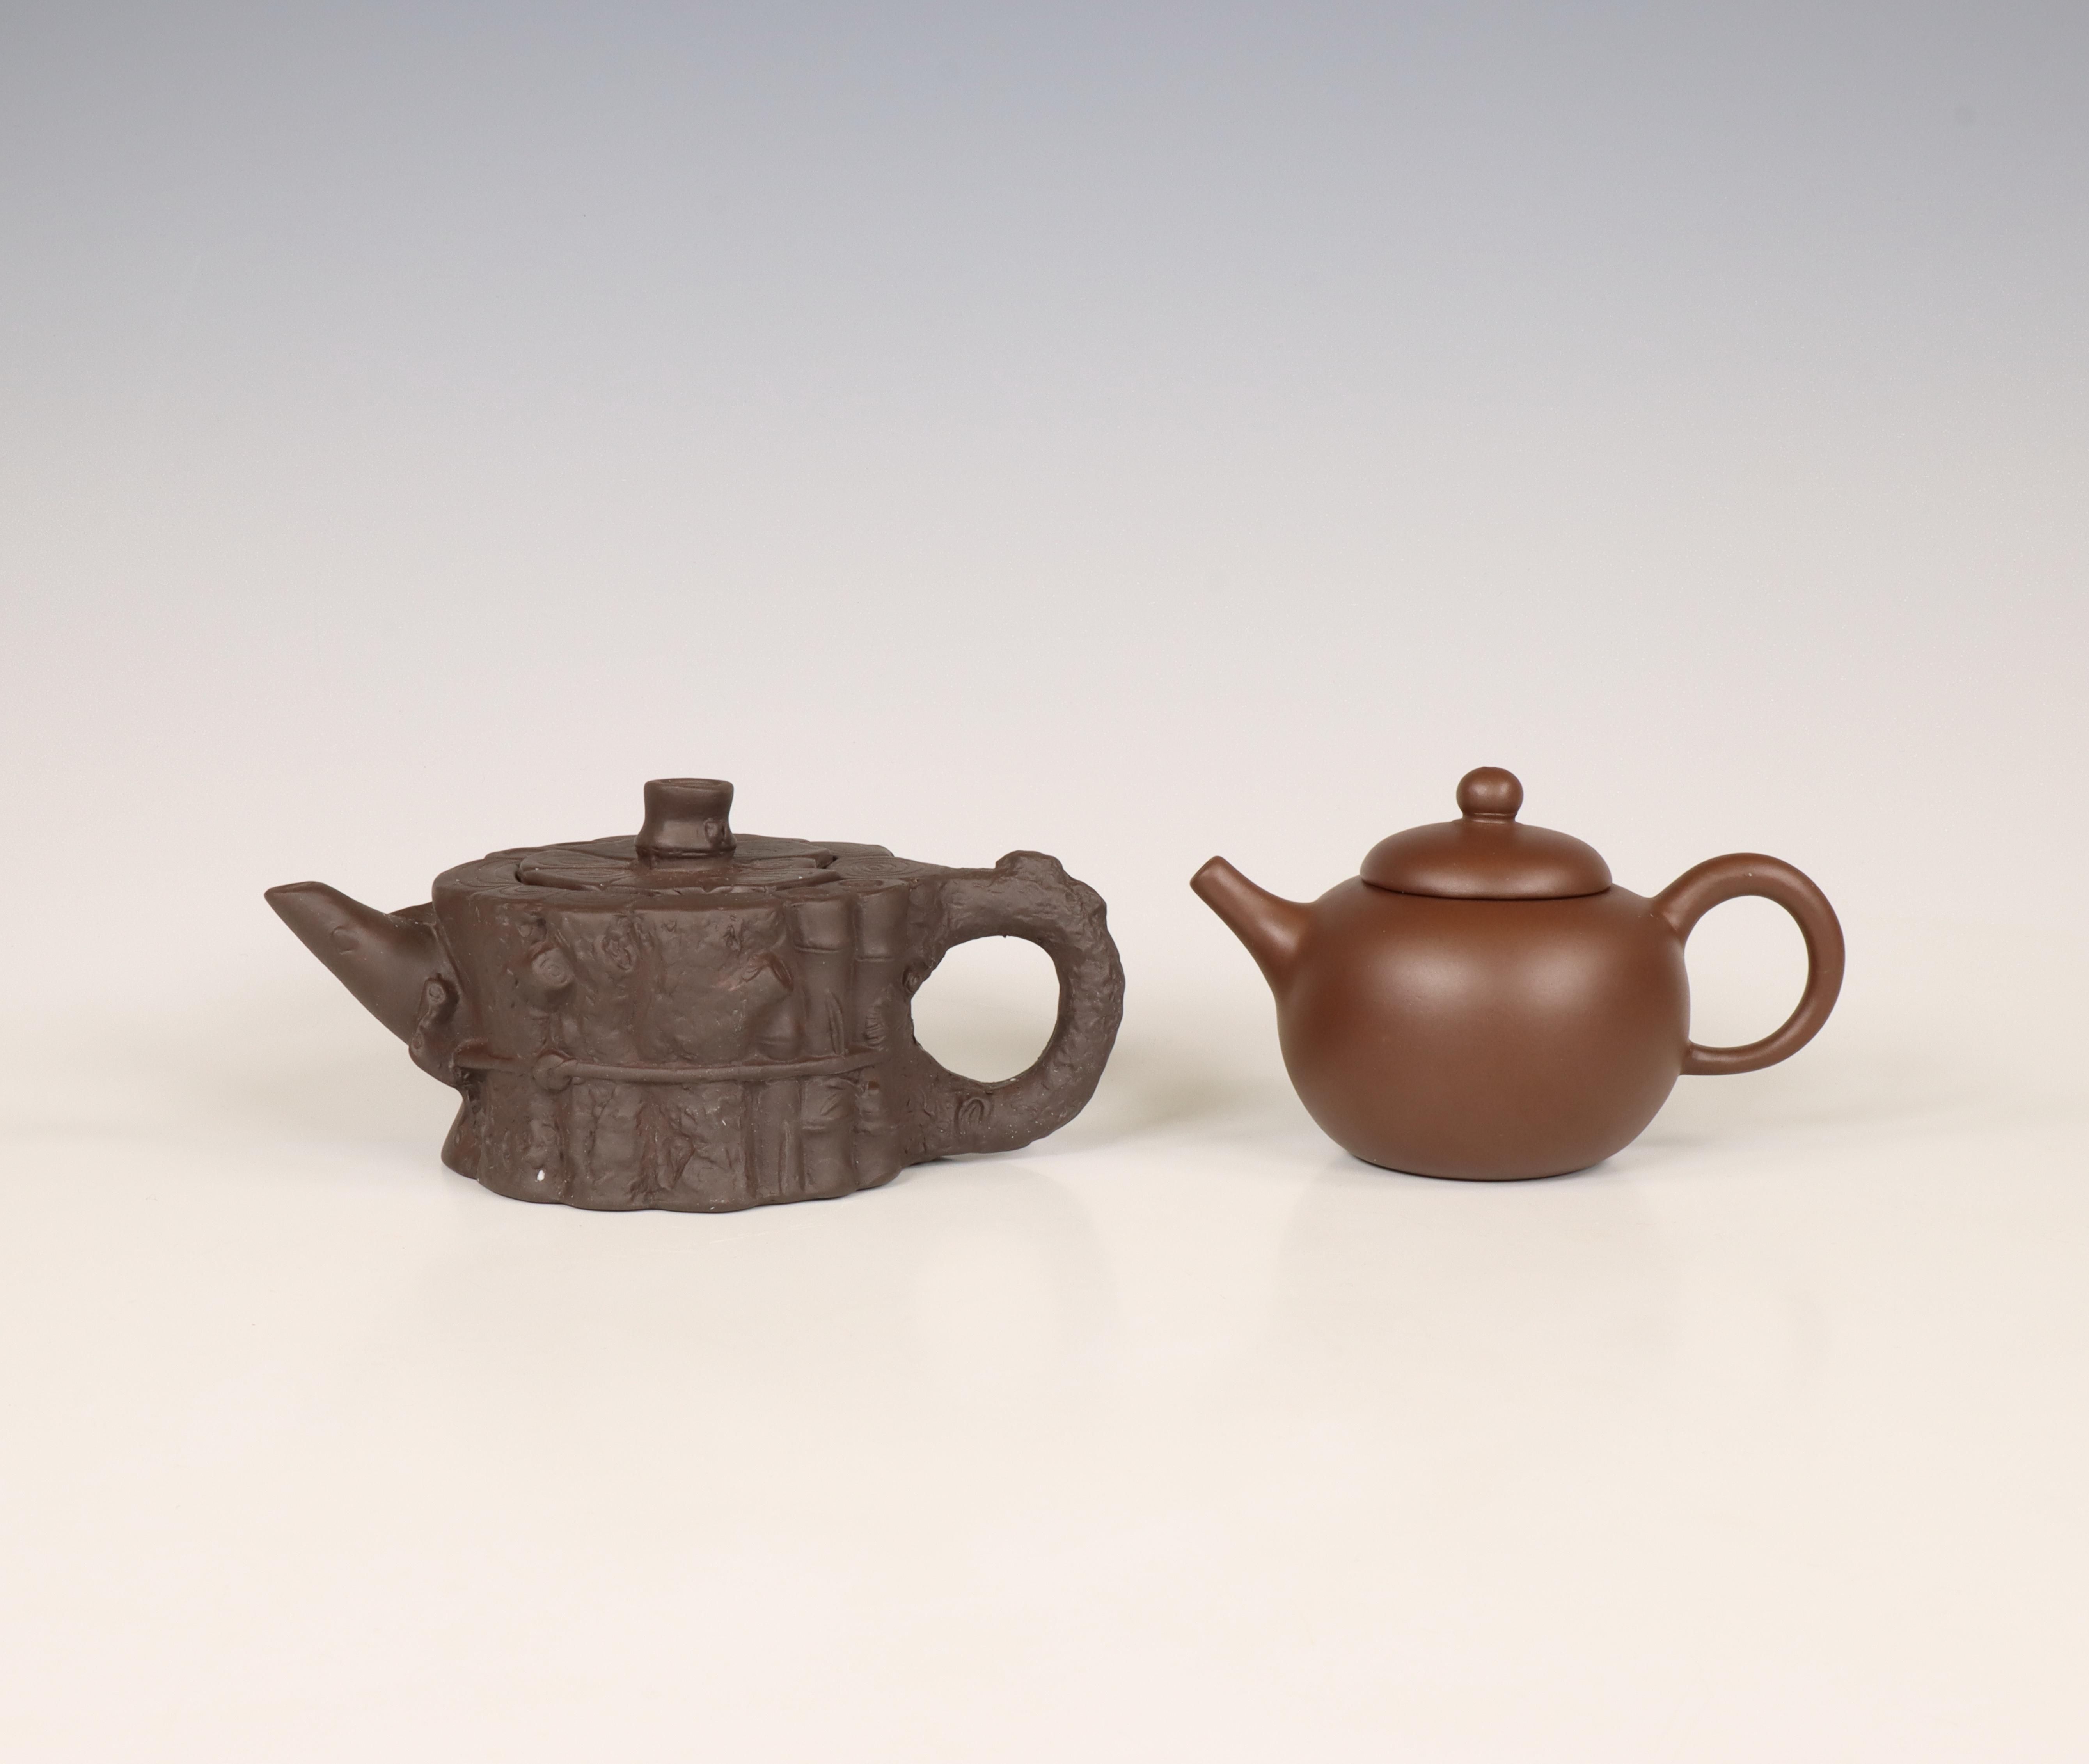 China, two Yixing earthenware teapots and covers, modern,